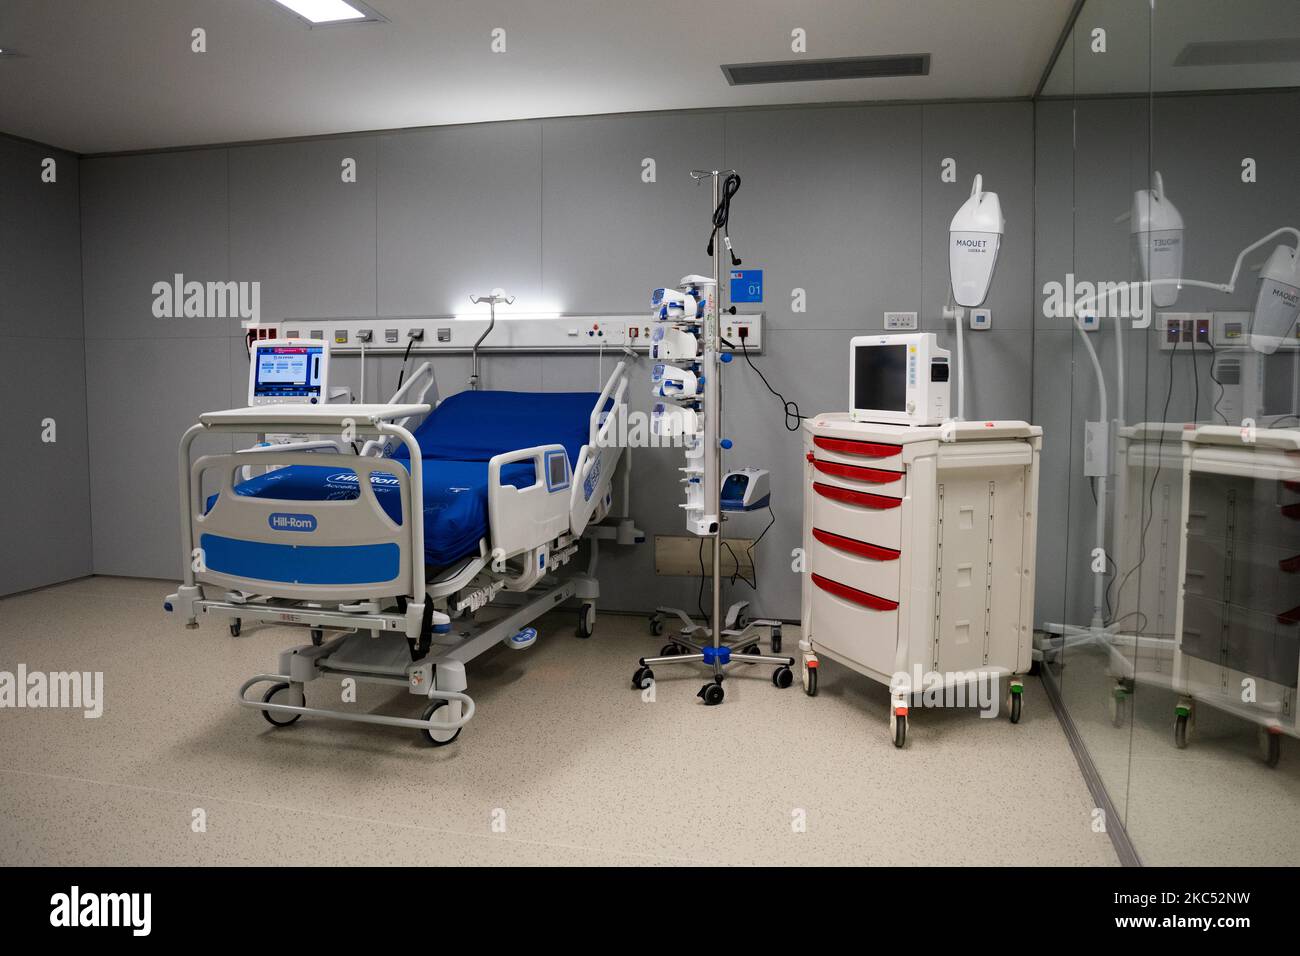 Intensive care bed (ICU) of the new Hospital Nurse Isabel Zendal in the Valdebebas neighborhood, at its inauguration on December 1, 2020 in Madrid, Spain. The new hospital built against the clock with a current cost of approximately 100 million euros exceeding the 50 million euros budgeted from the beginning, for pandemics or health emergencies, the hospital still lacks enough medical staff, and is still unfinished. (Photo by Jon Imanol Reino/NurPhoto) Stock Photo